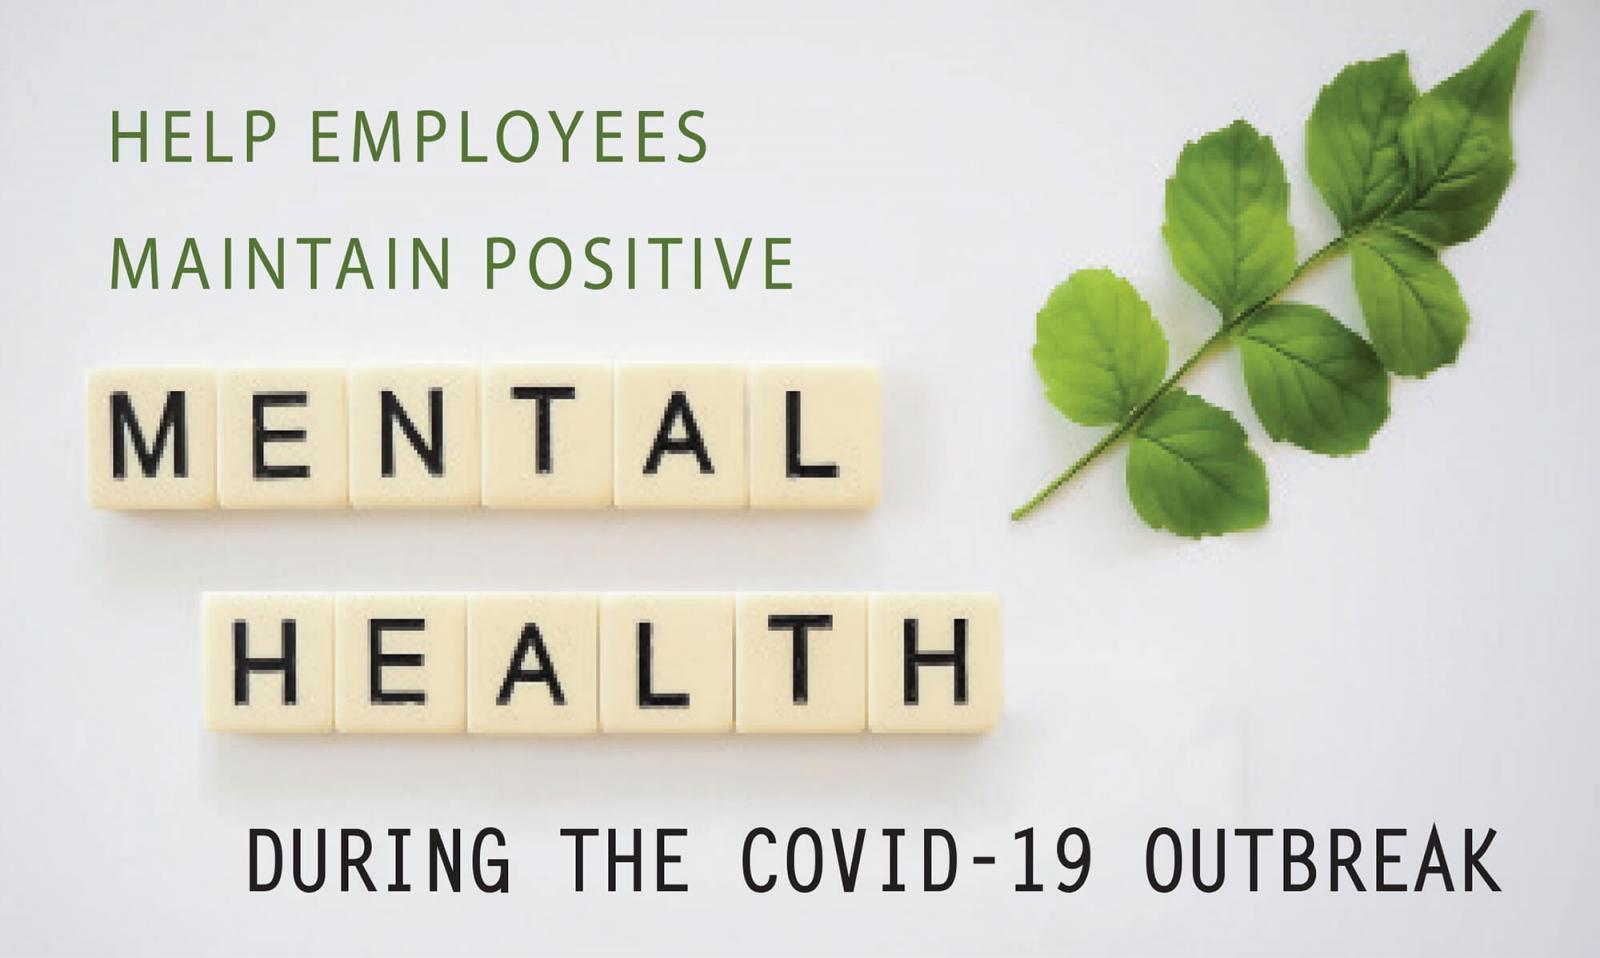 Help employees maintain positive mental health during the Covid-19 outbreak